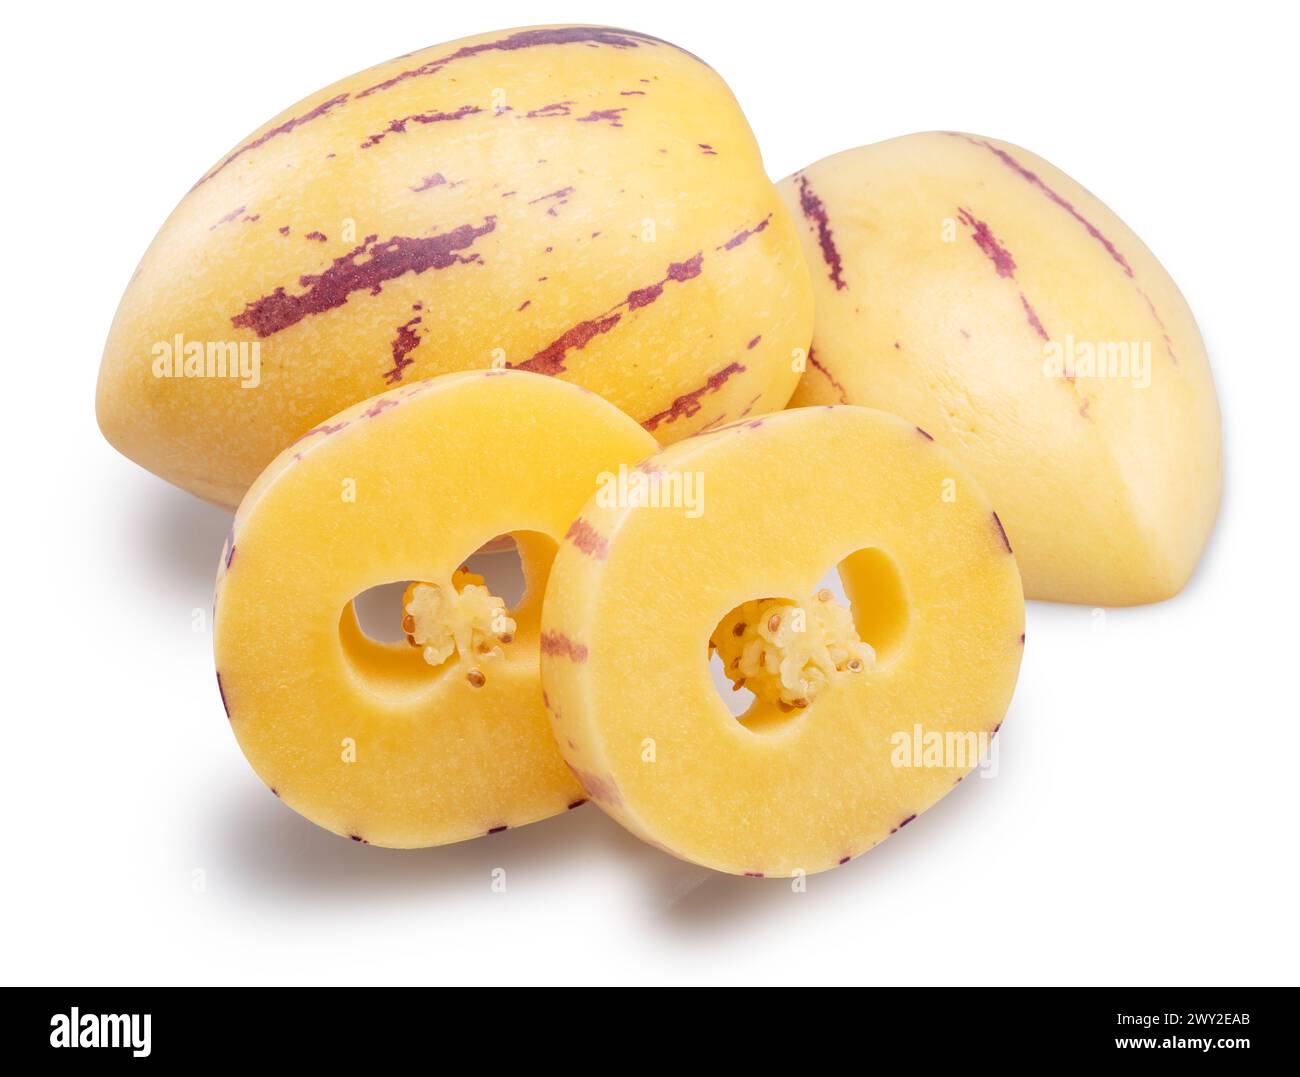 Pepino melon or pepino dulce and sliced fruit isolated on white background. File contains clipping paths. Stock Photo